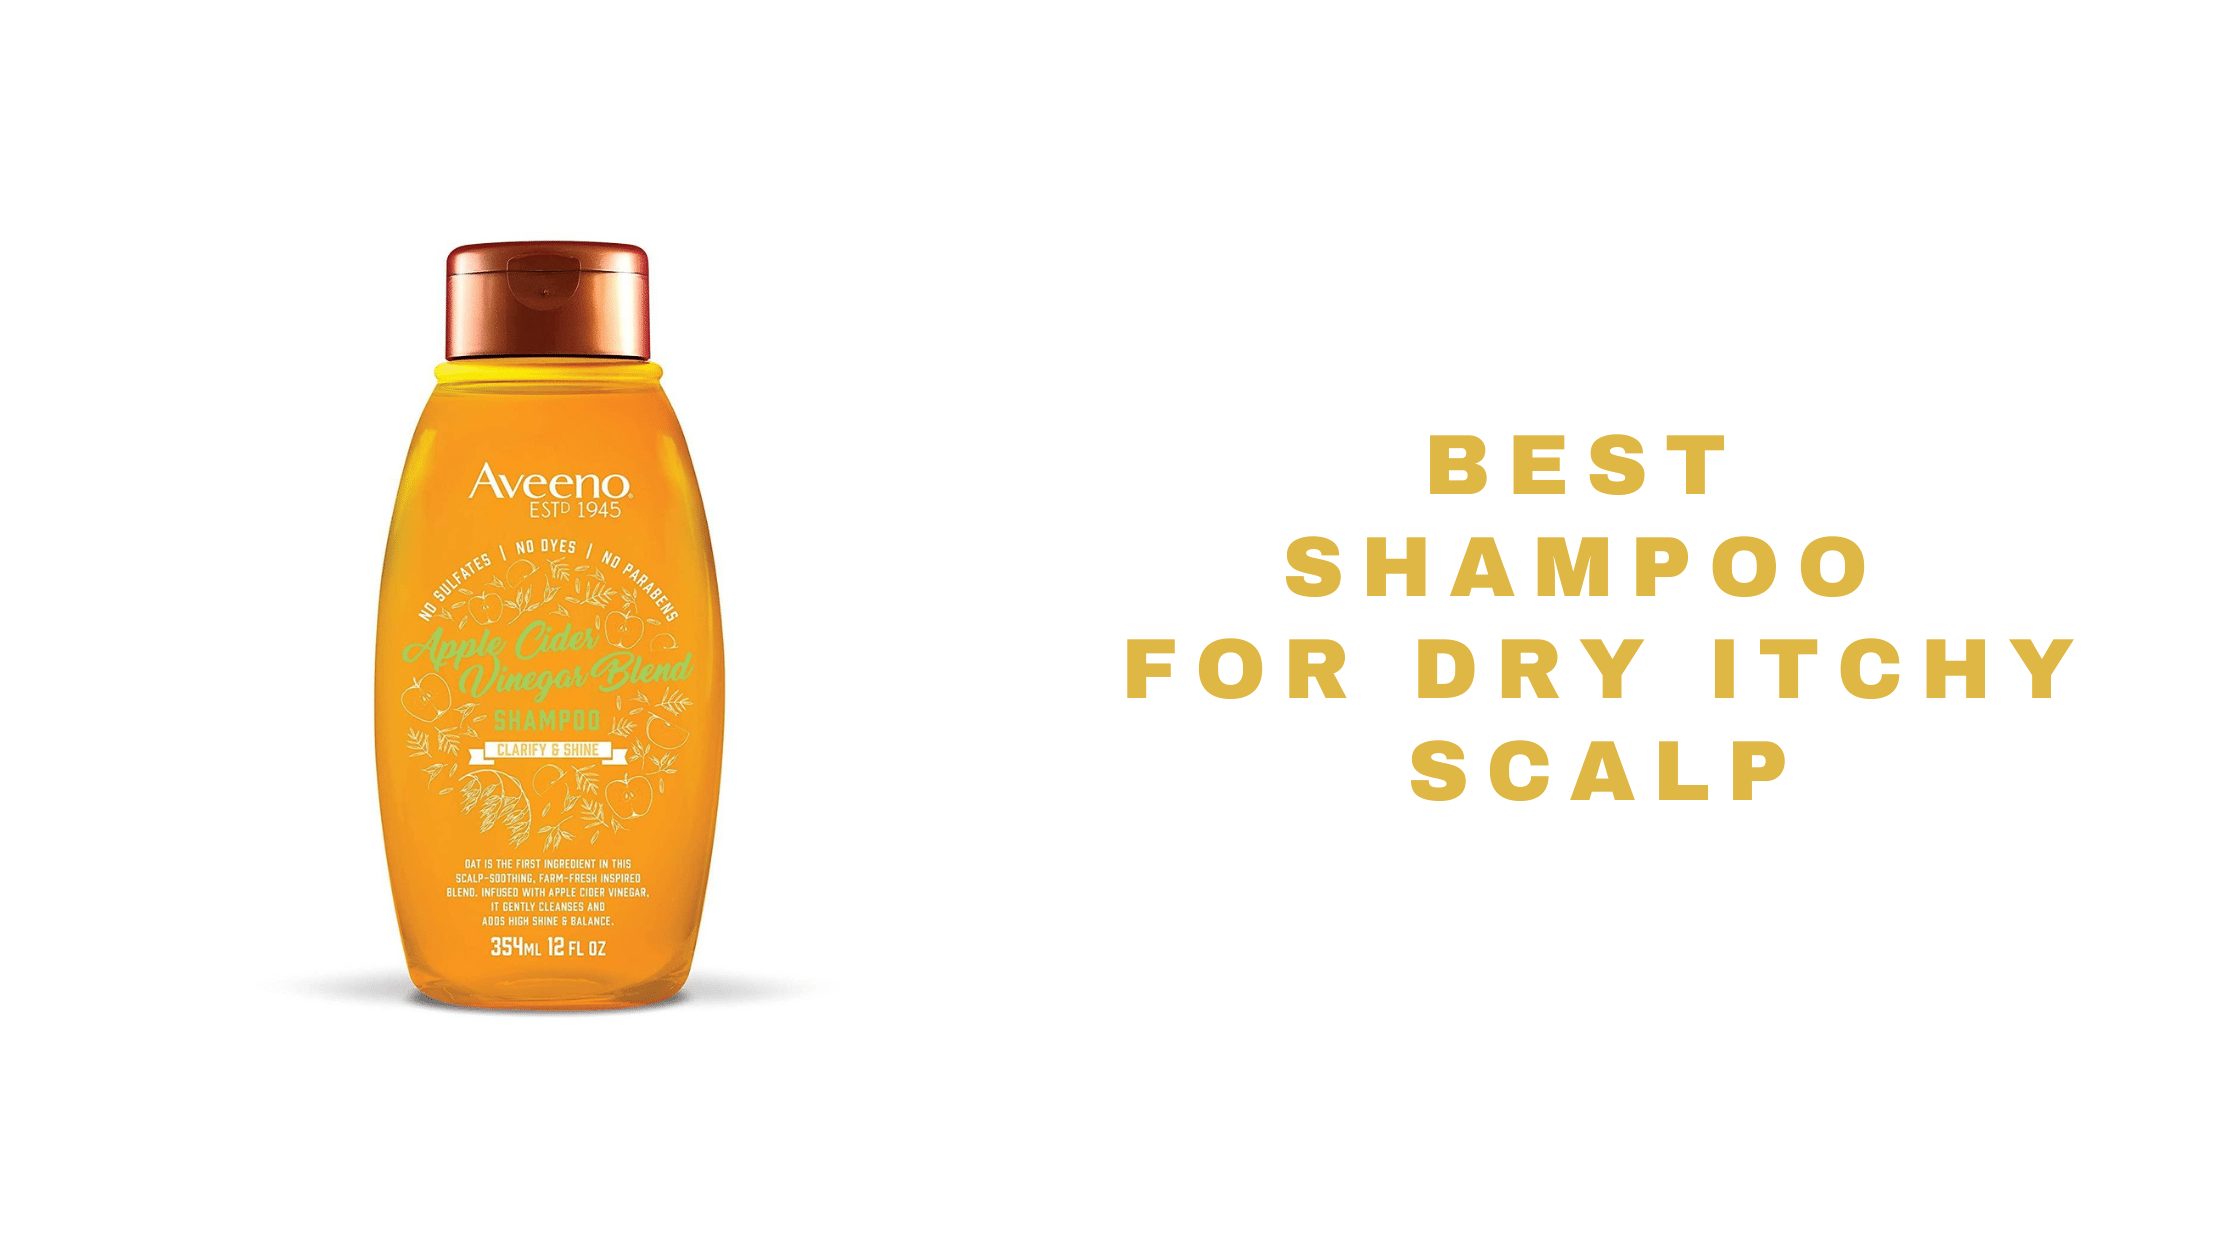 14 Best Shampoo For Dry Itchy Scalp 2021